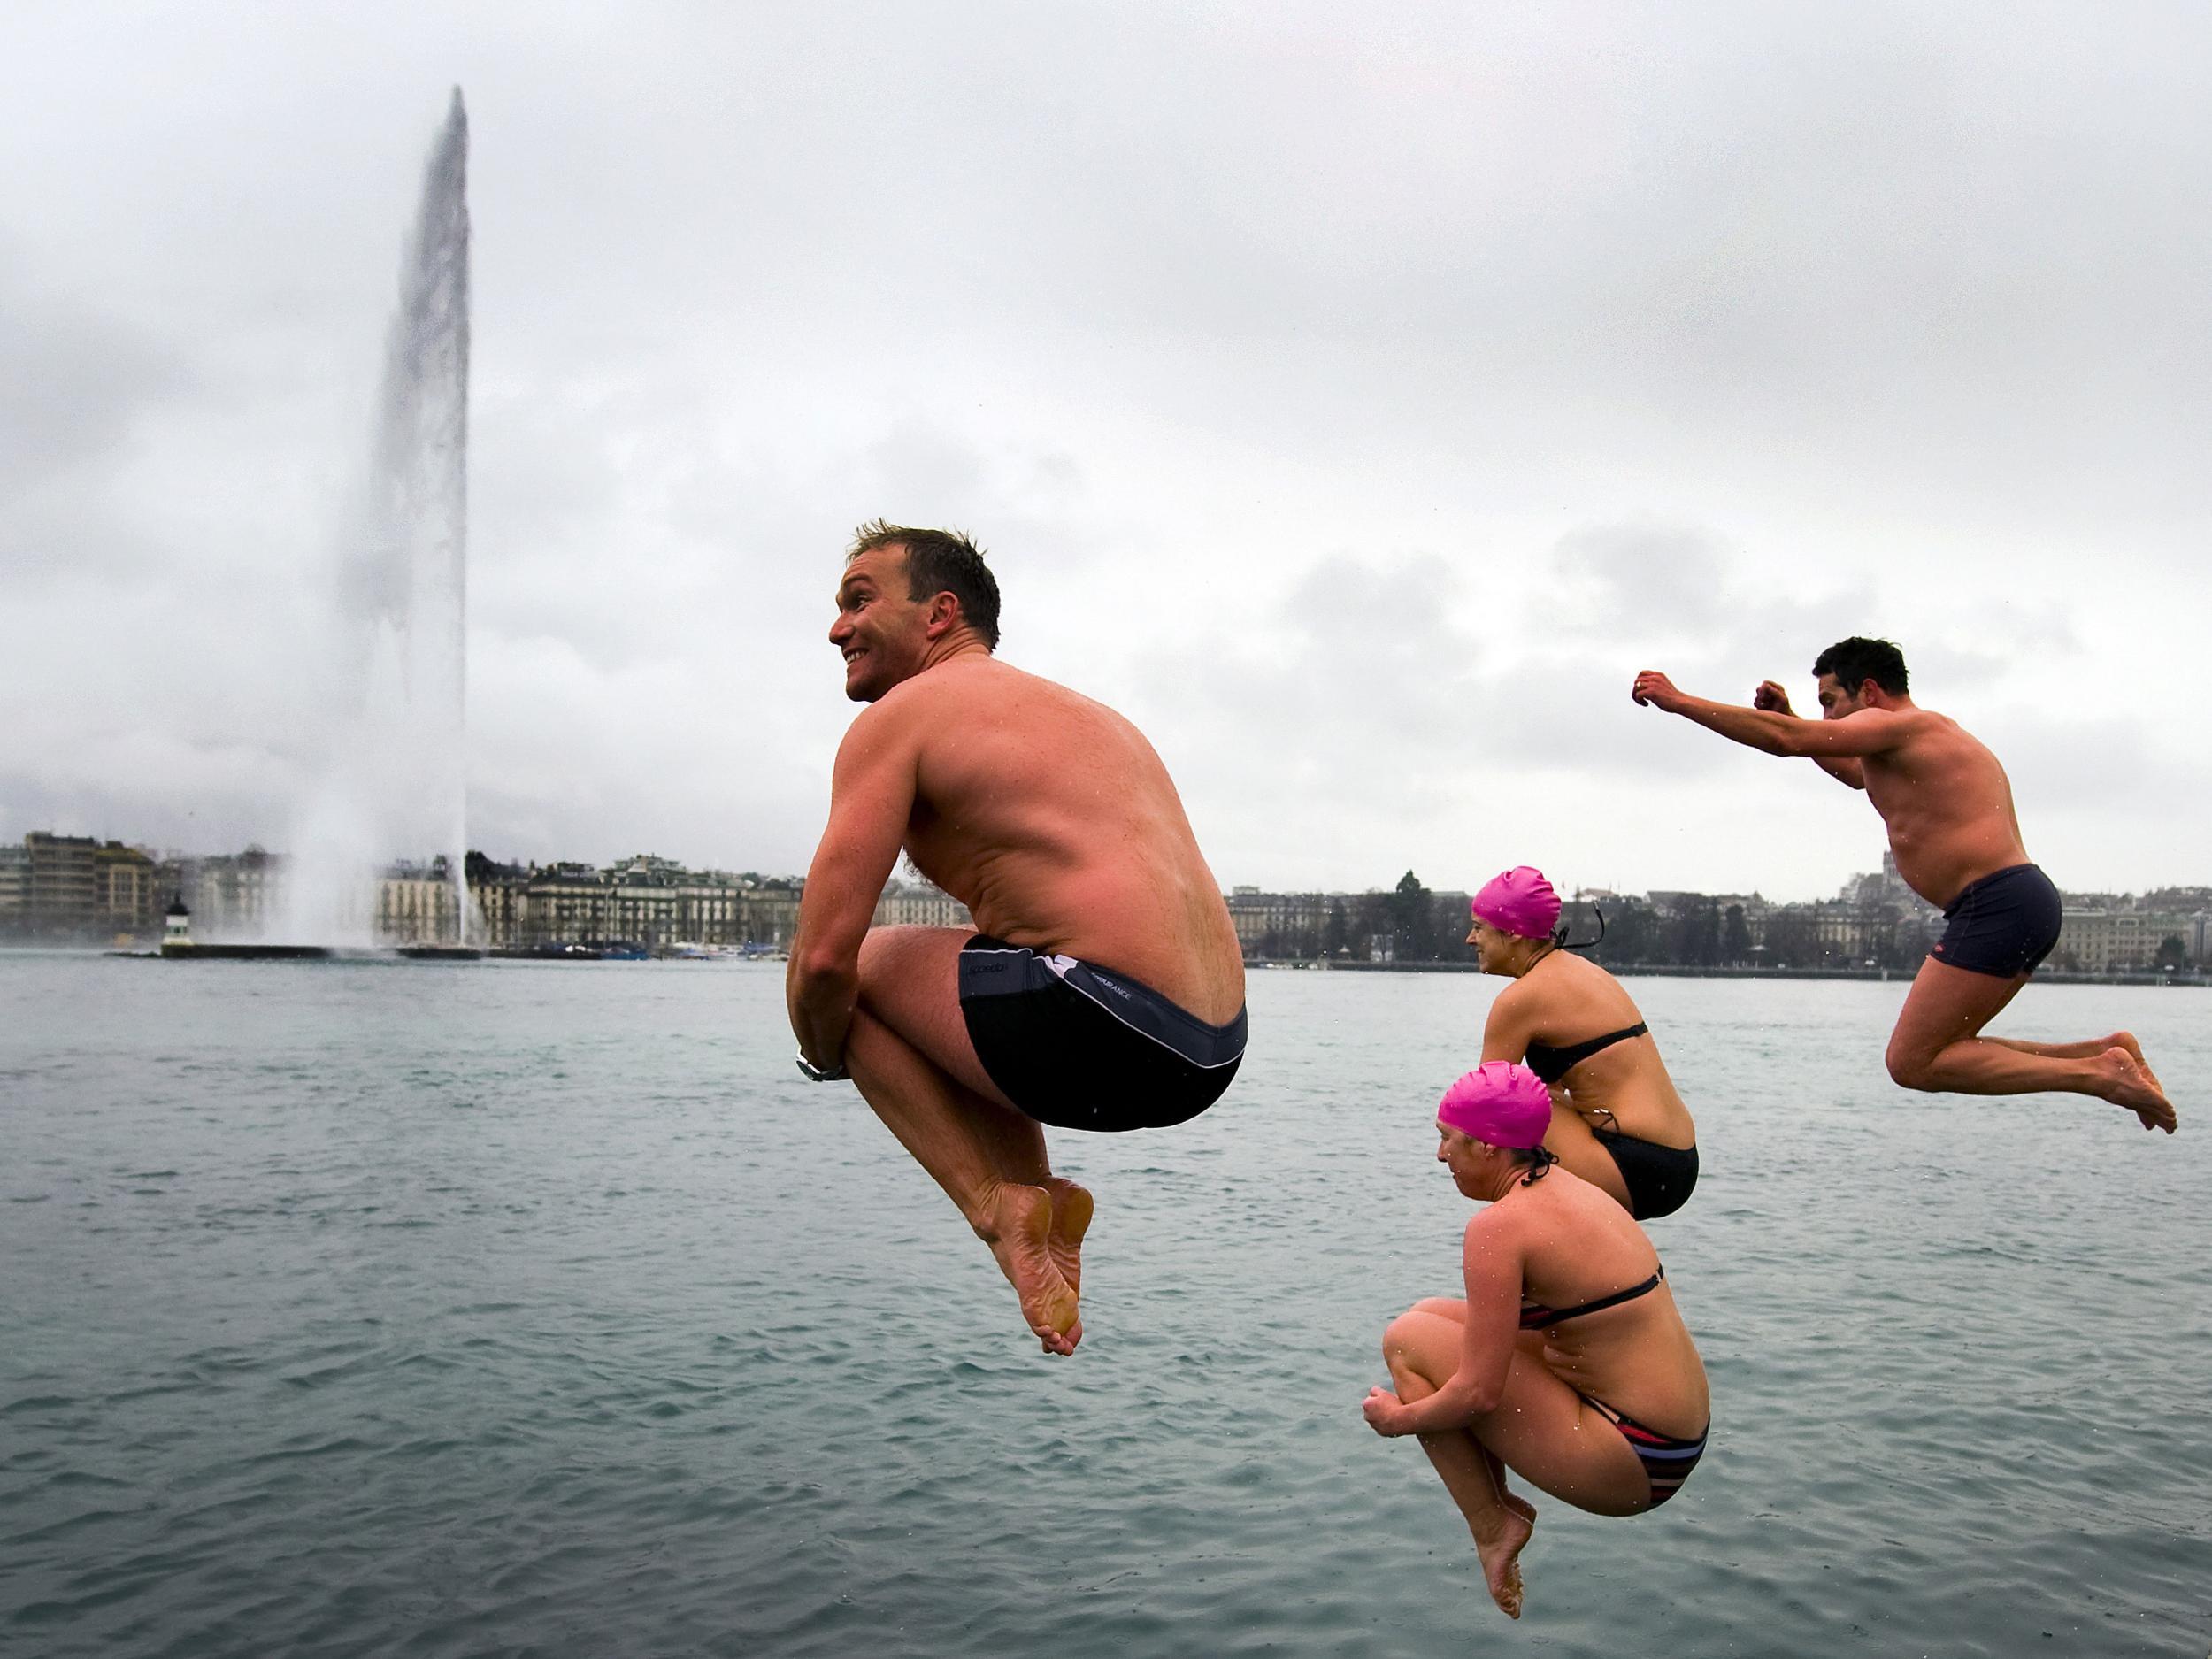 Women can now swim topless in Lake Geneva as Swiss authorities overturn decades-old rule The Independent The Independent pic